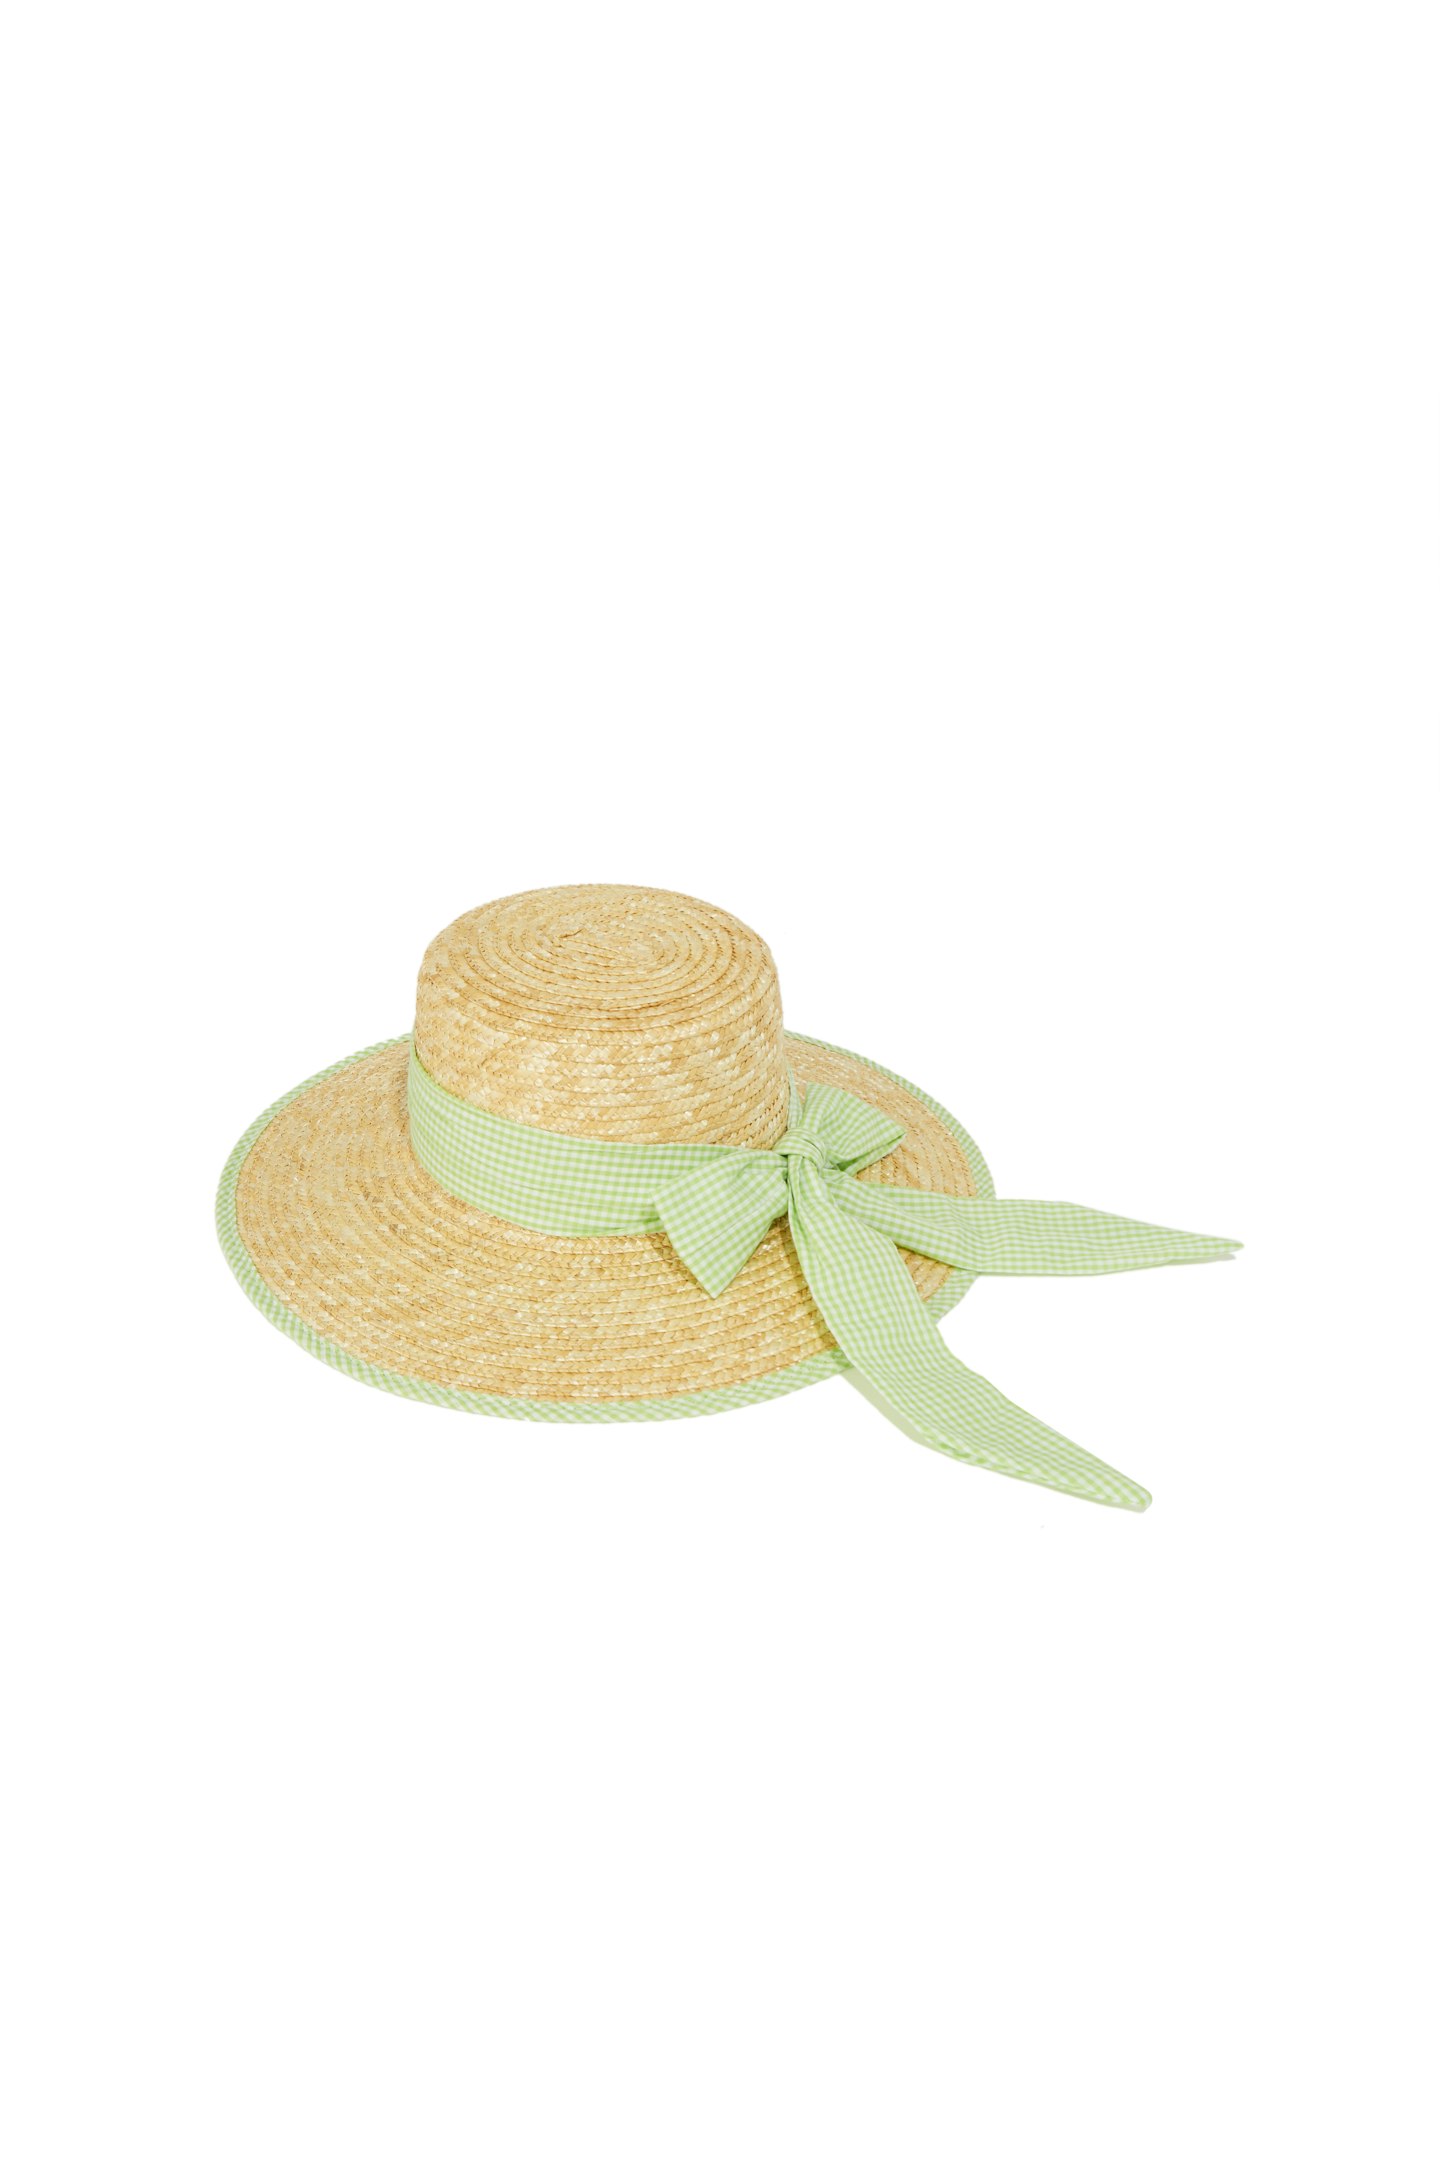 Sunhat with Gingham Ribbon, £25